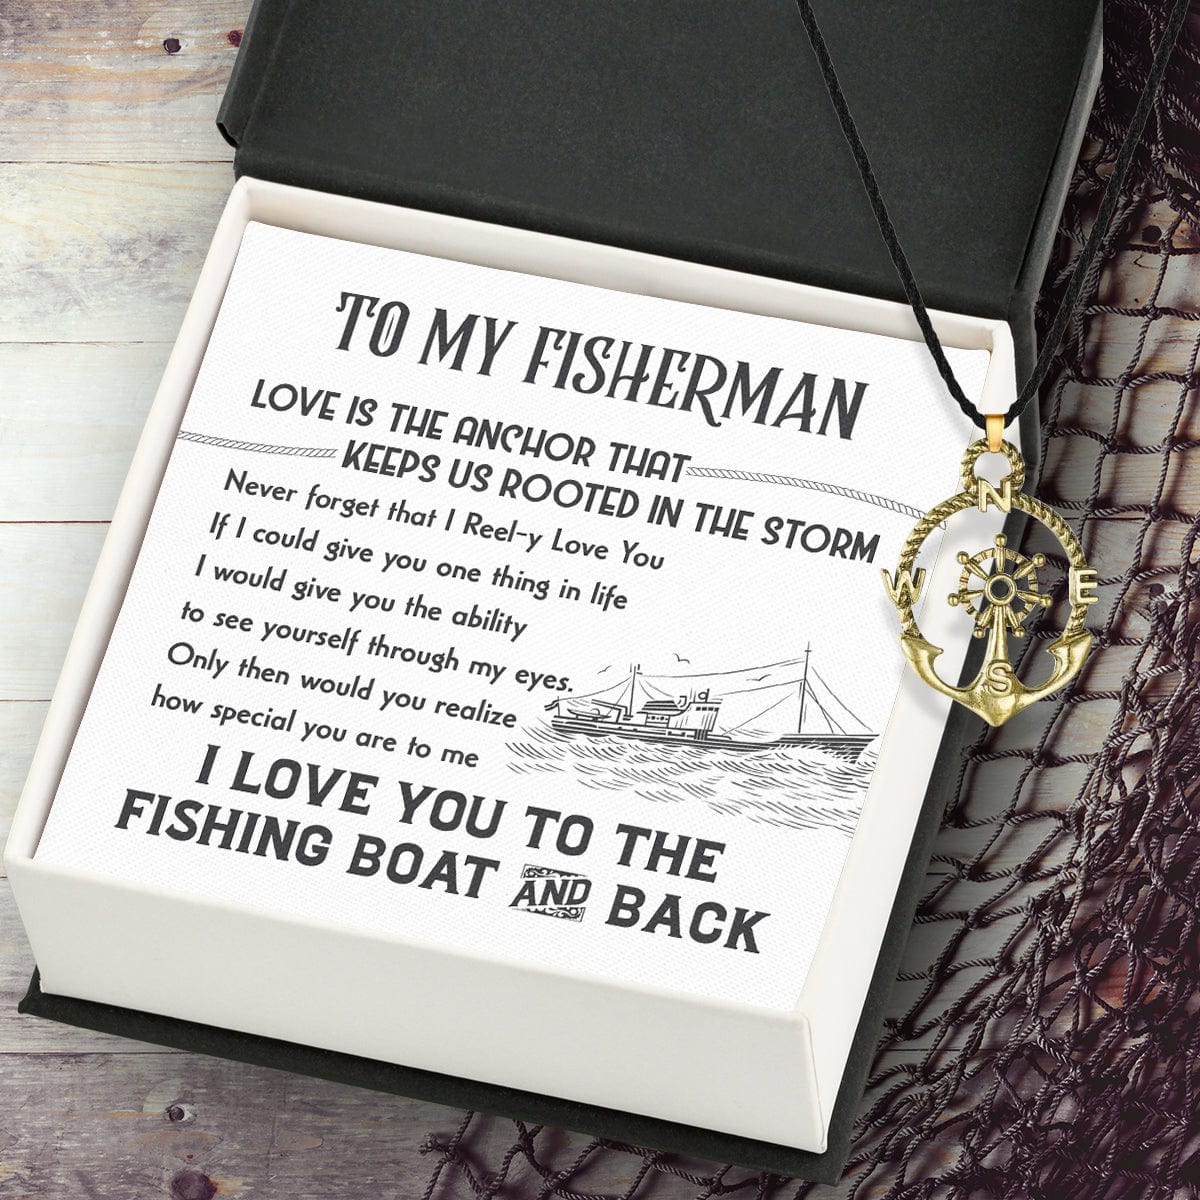 Vintage Anchor Compass Necklace - Fishing - To My Fisherman - I Love You To The Fishing Boat & Back - Gnfx26006